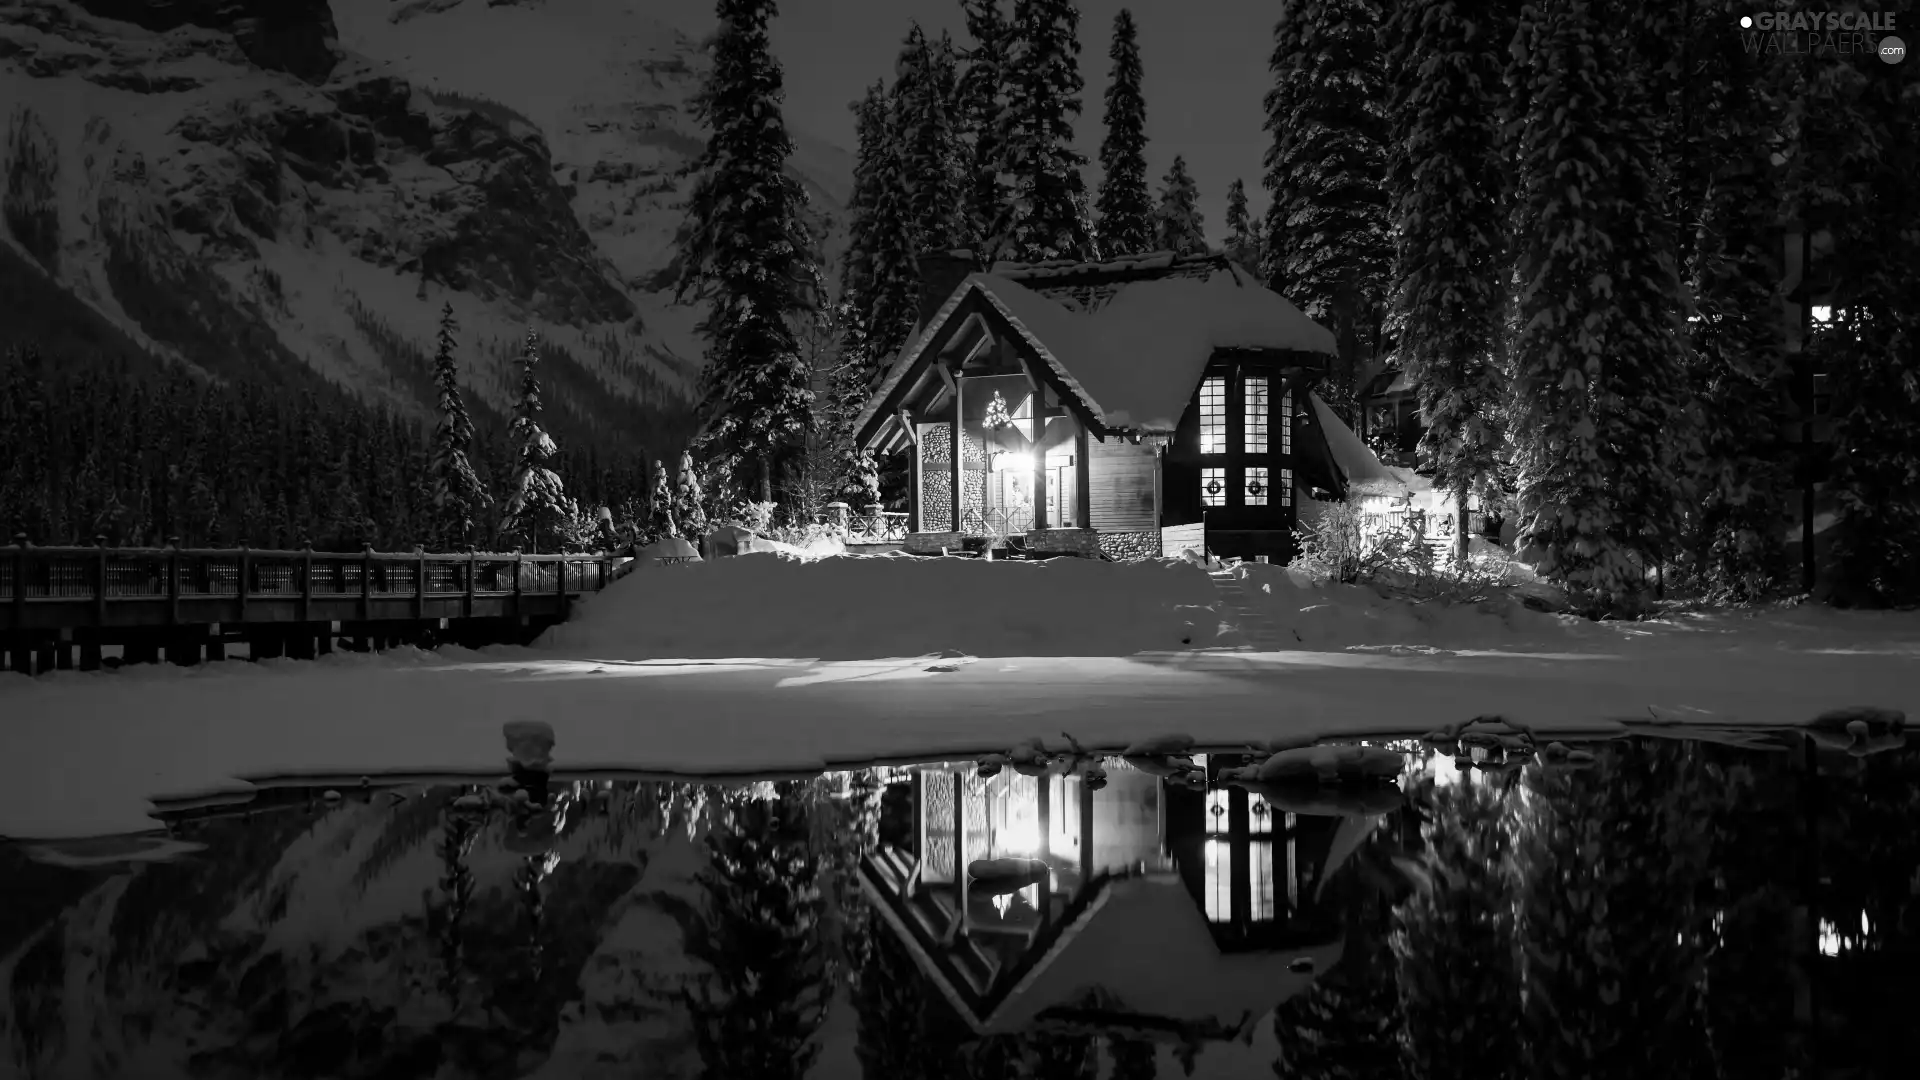 Mountains, Floodlit, Province of British Columbia, winter, Canada, trees, Emerald Lake, forest, snow, Yoho National Park, bridge, viewes, house